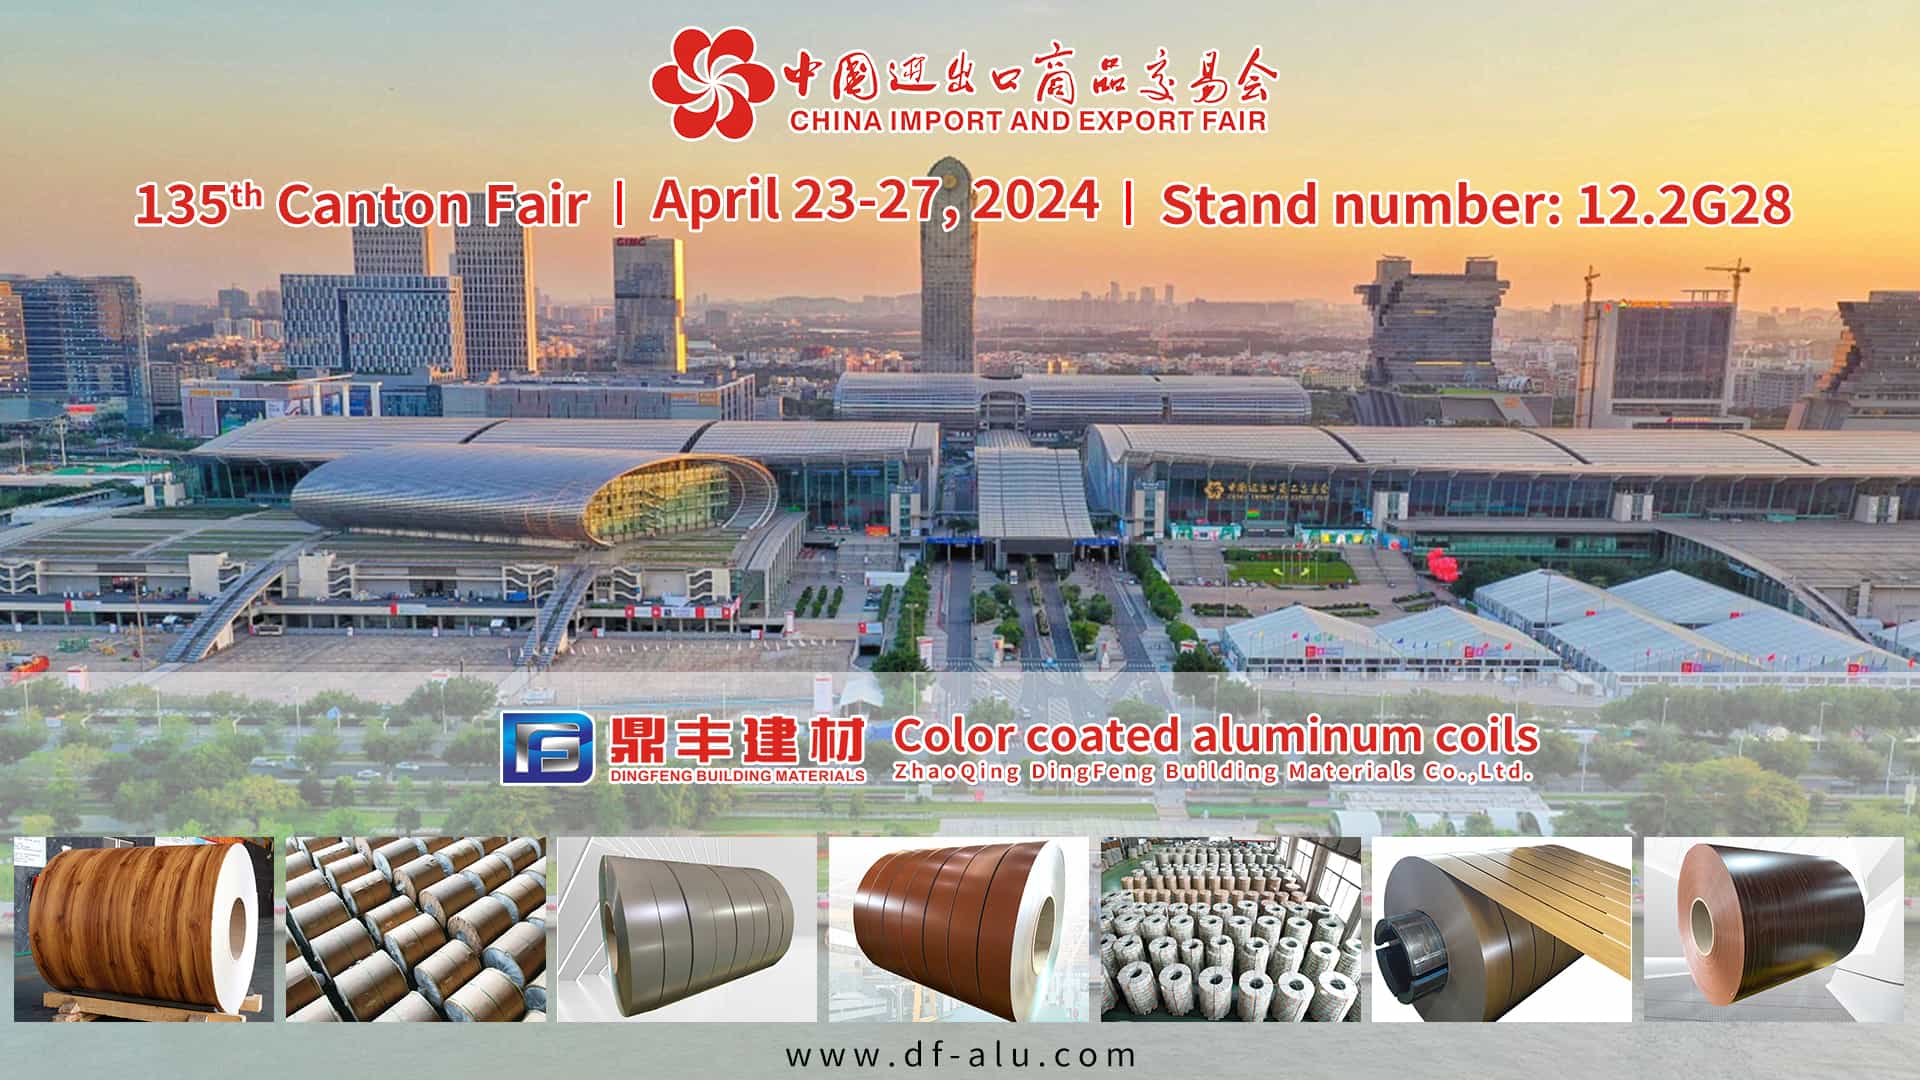 Zhaoqing Dingfeng Building Materials Co., Ltd. will attend the 135rd Canton Fair on 23-27th, April 2024 In Guangzhou